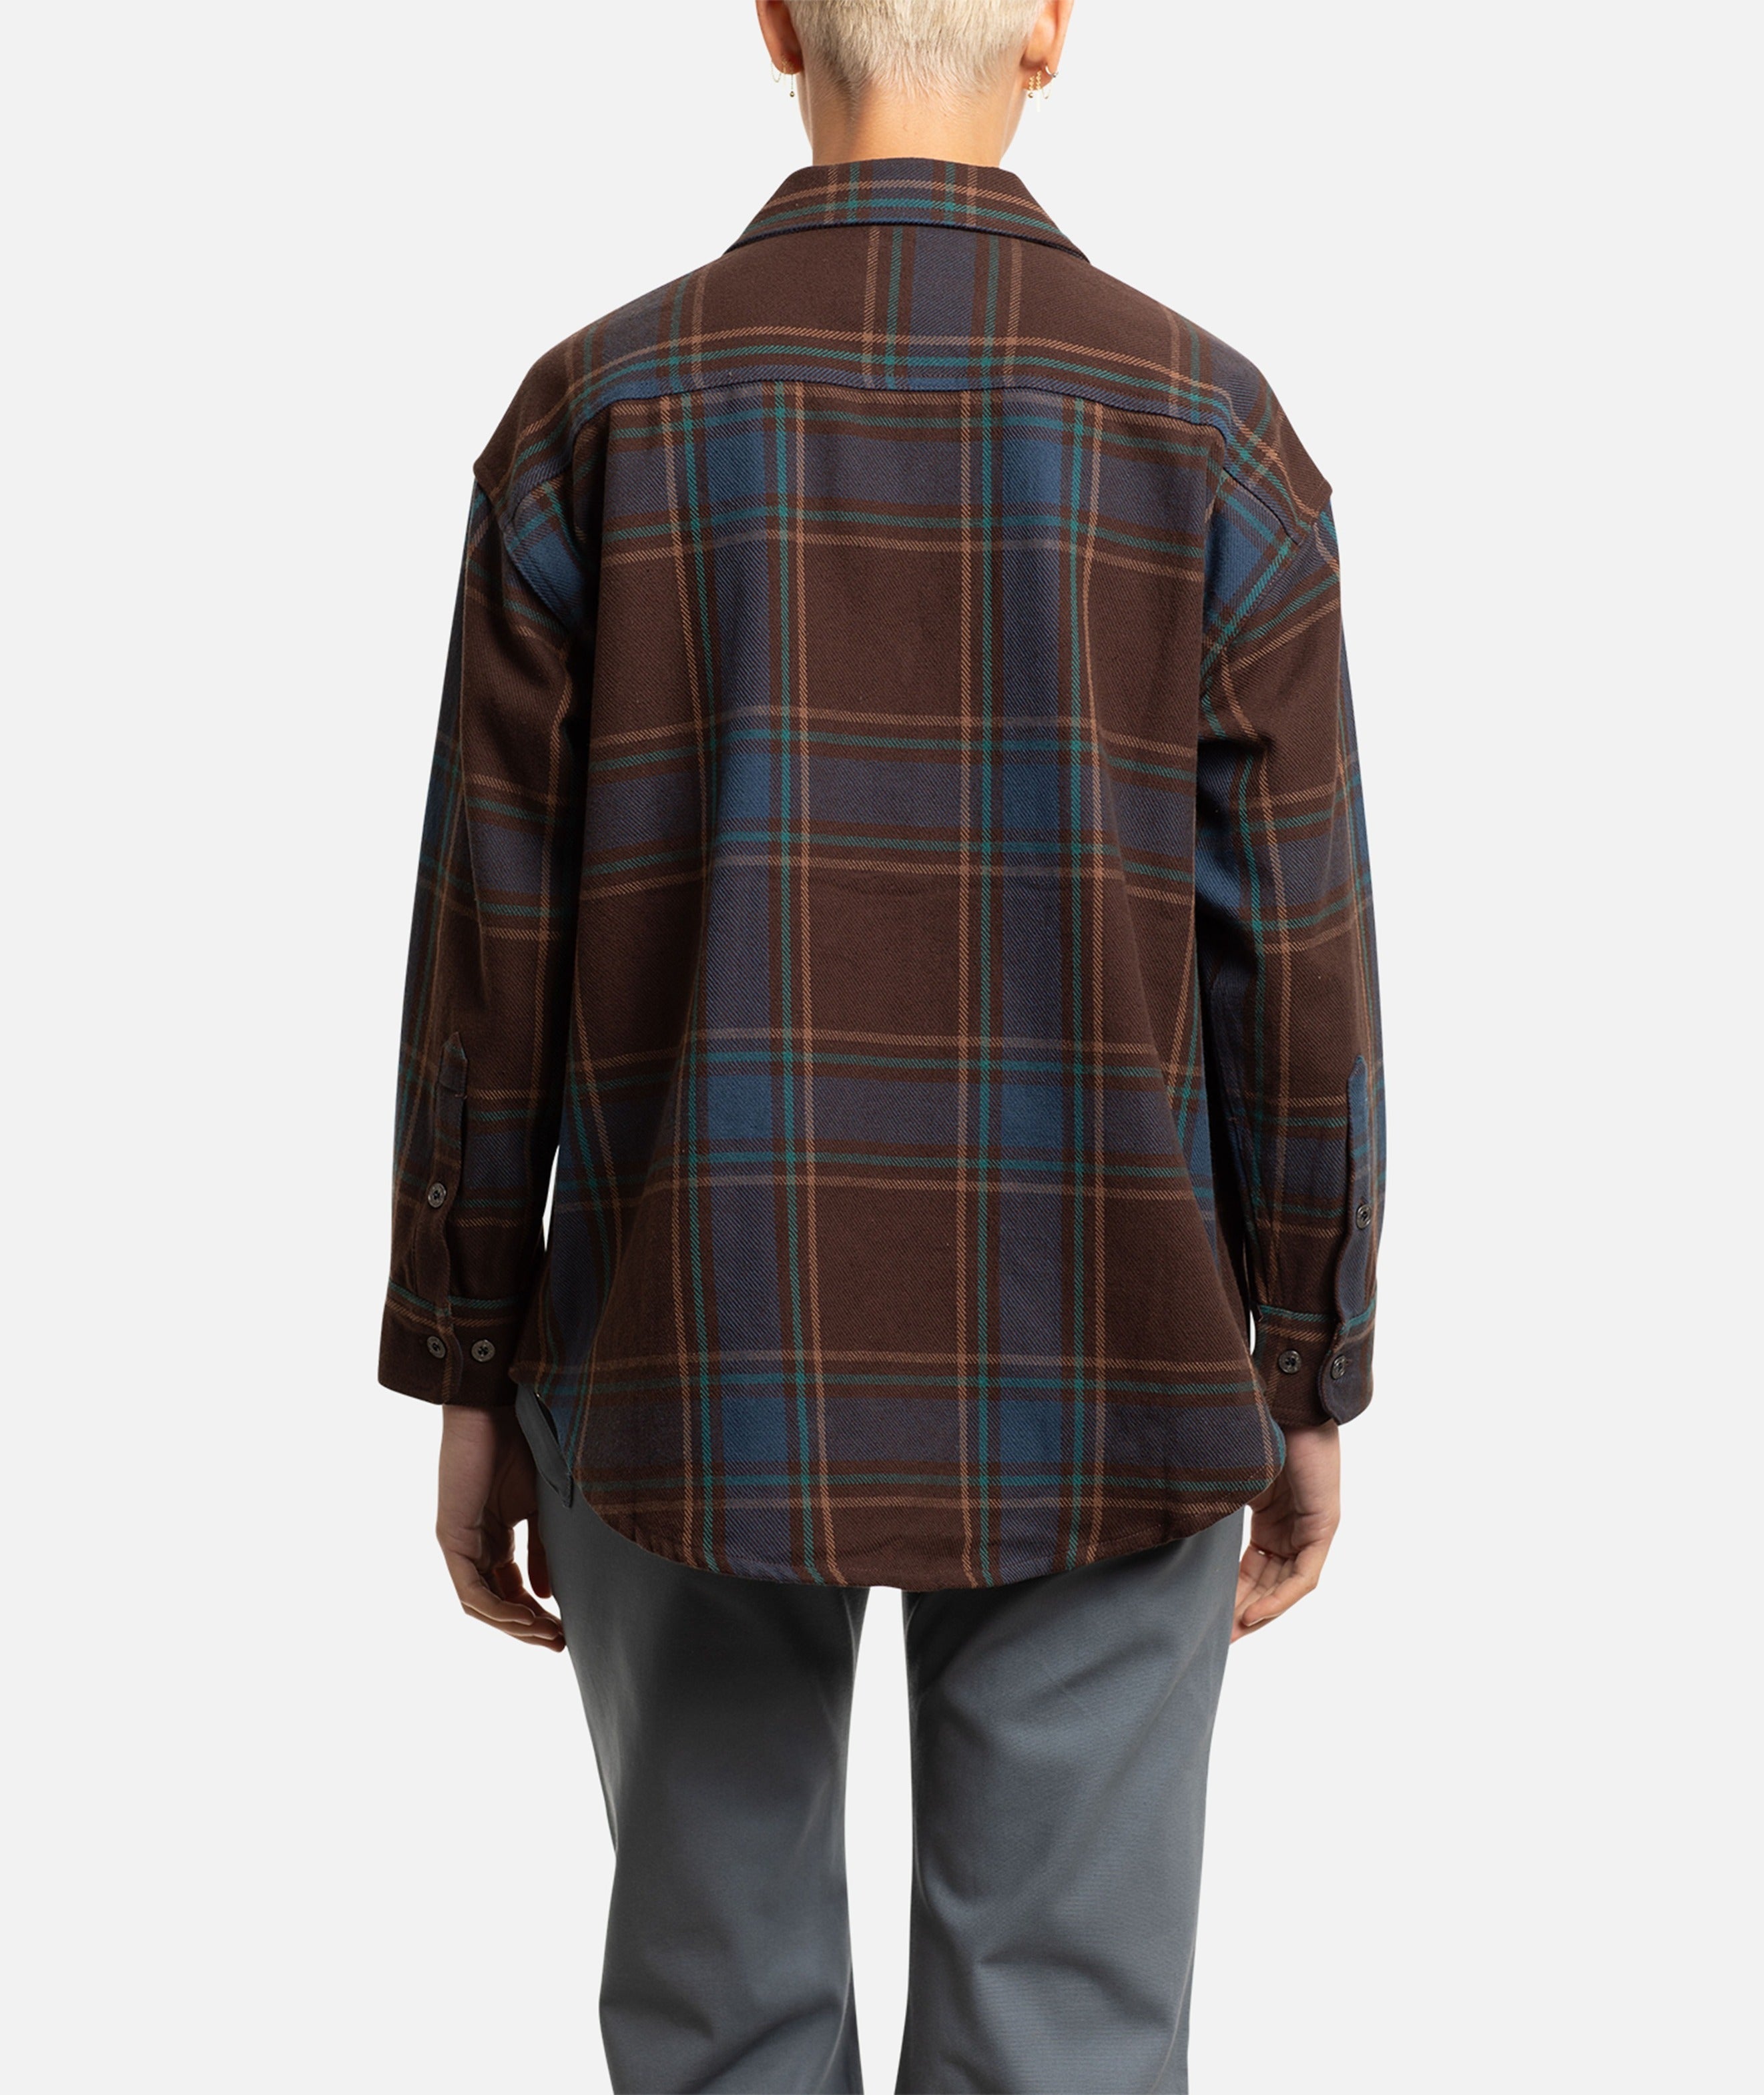 Anchor Flannel - Brown